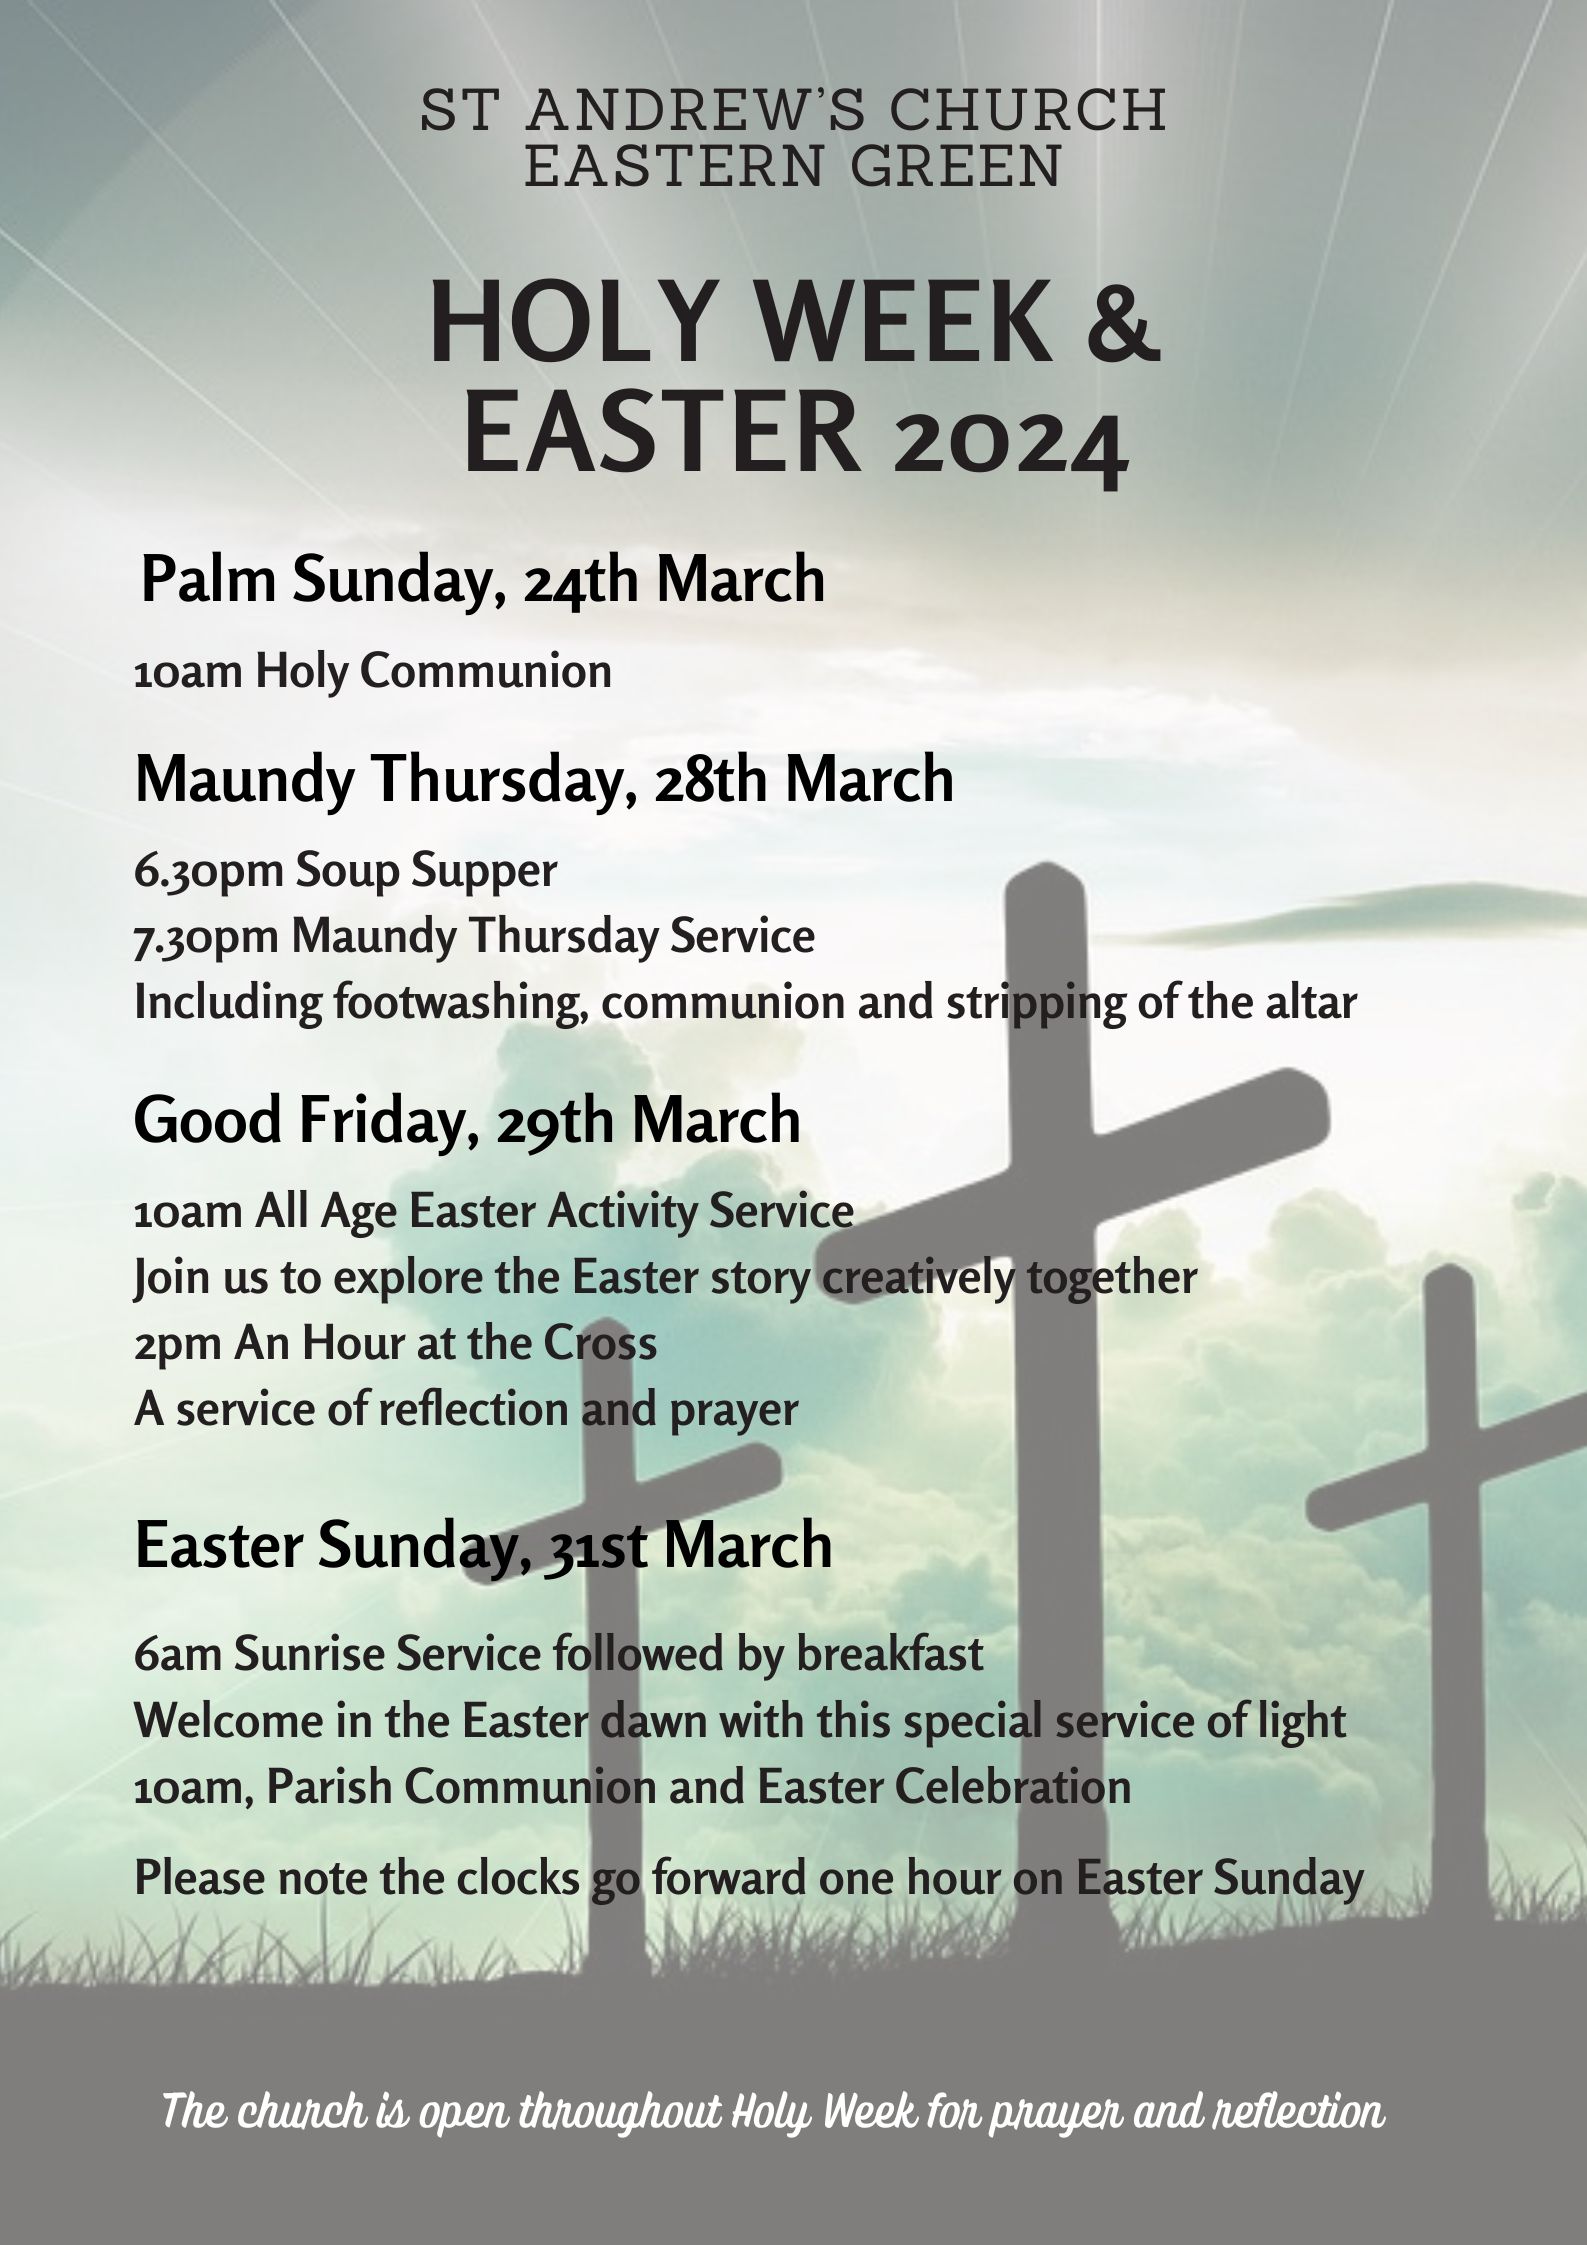 Good Friday All Age Easter Activity Service